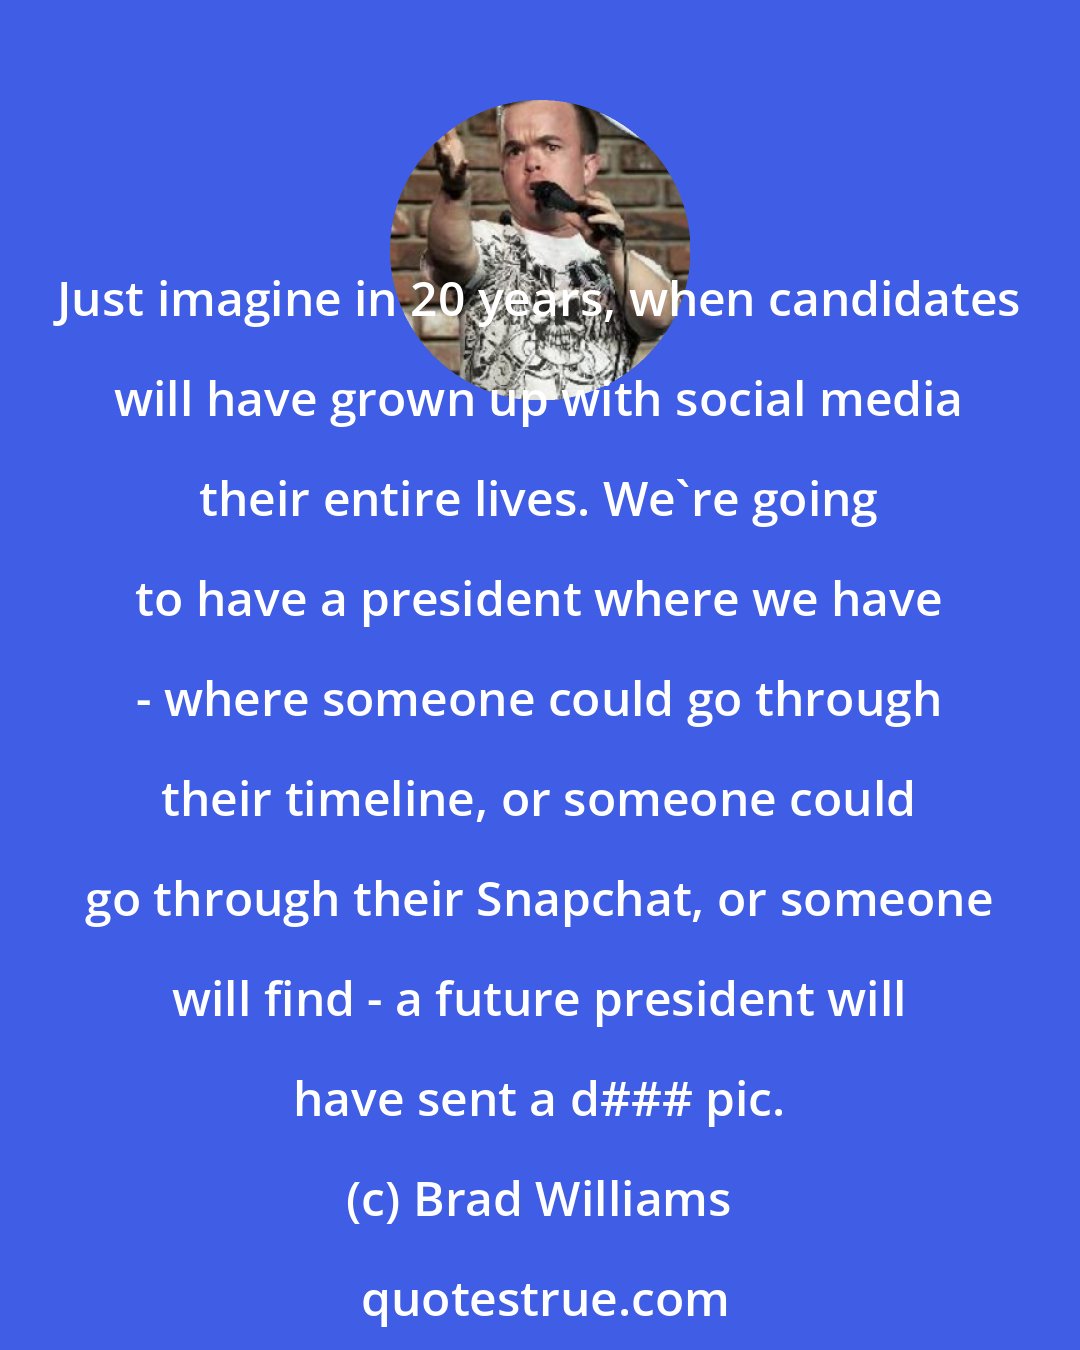 Brad Williams: Just imagine in 20 years, when candidates will have grown up with social media their entire lives. We're going to have a president where we have - where someone could go through their timeline, or someone could go through their Snapchat, or someone will find - a future president will have sent a d### pic.